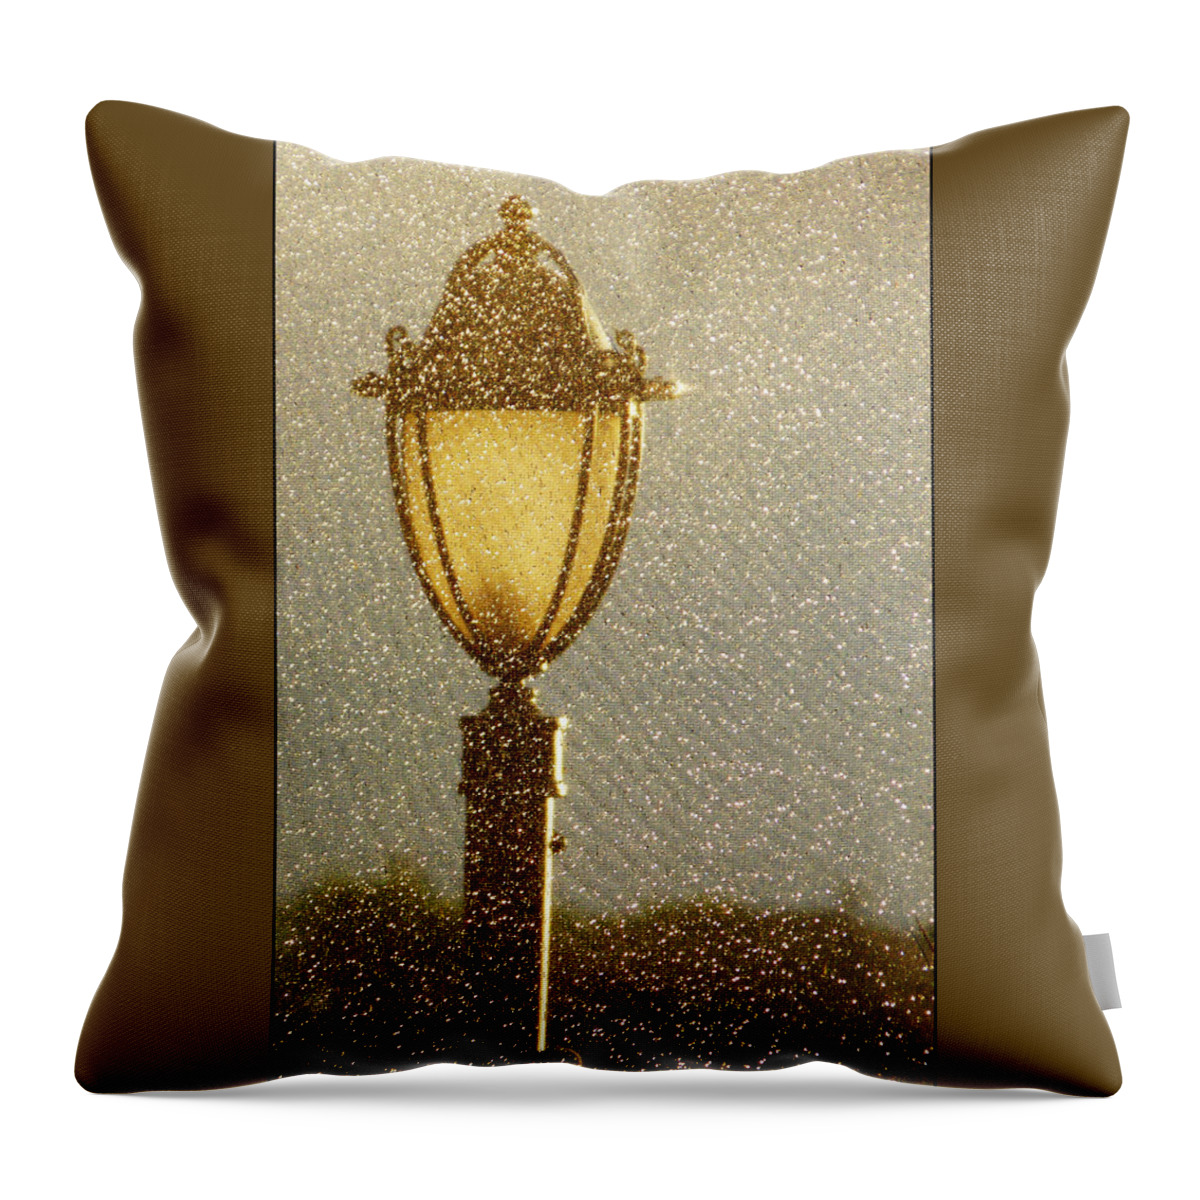 Lampost Throw Pillow featuring the photograph Rainy Day Lamp Post by Geraldine Alexander